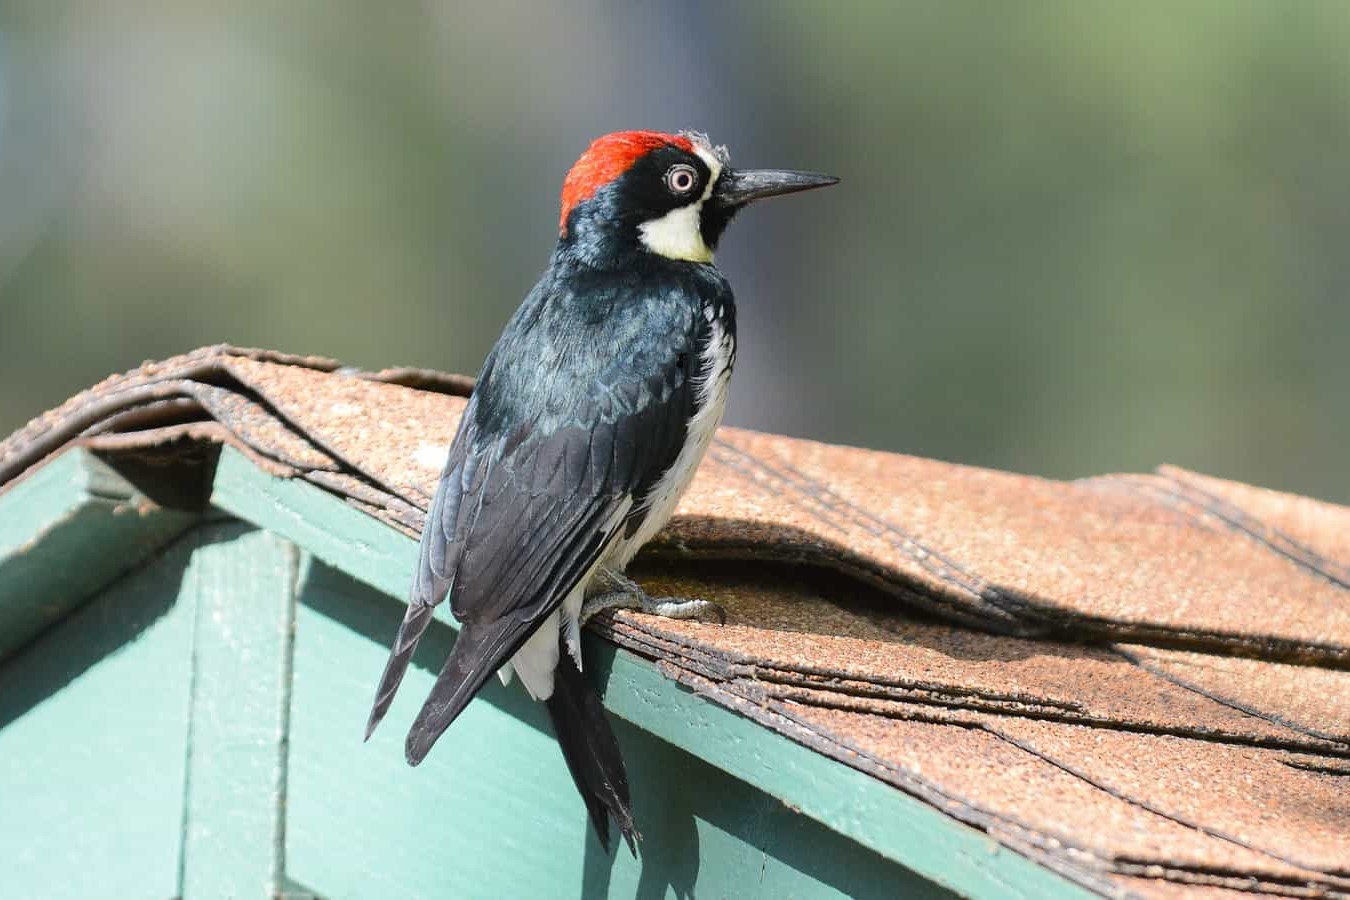 How To Effectively Deter Woodpeckers From Damaging Your Property